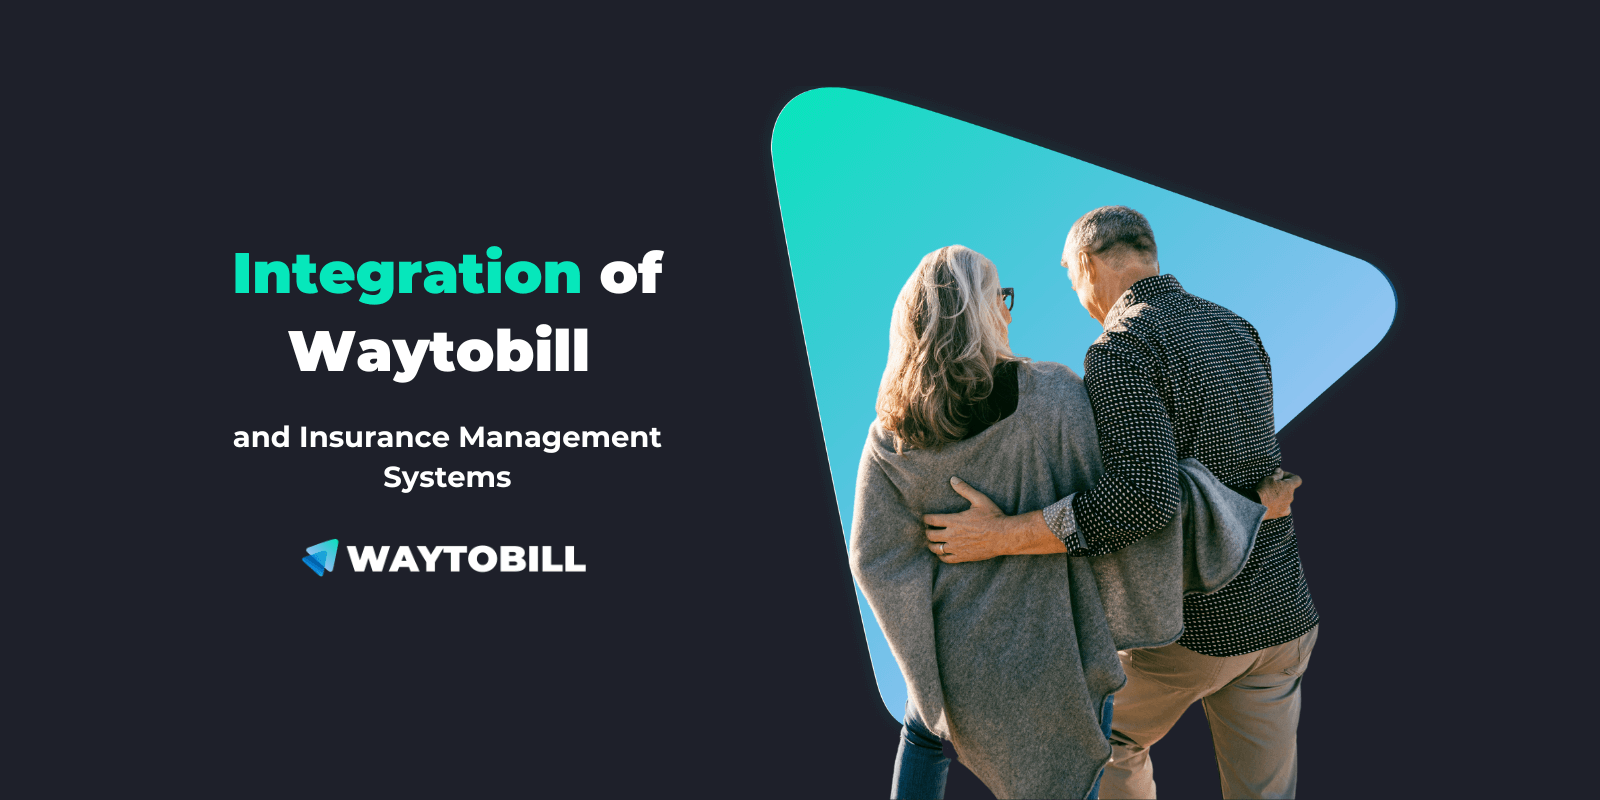 How Waytobill Integrates with Insurance Management Systems